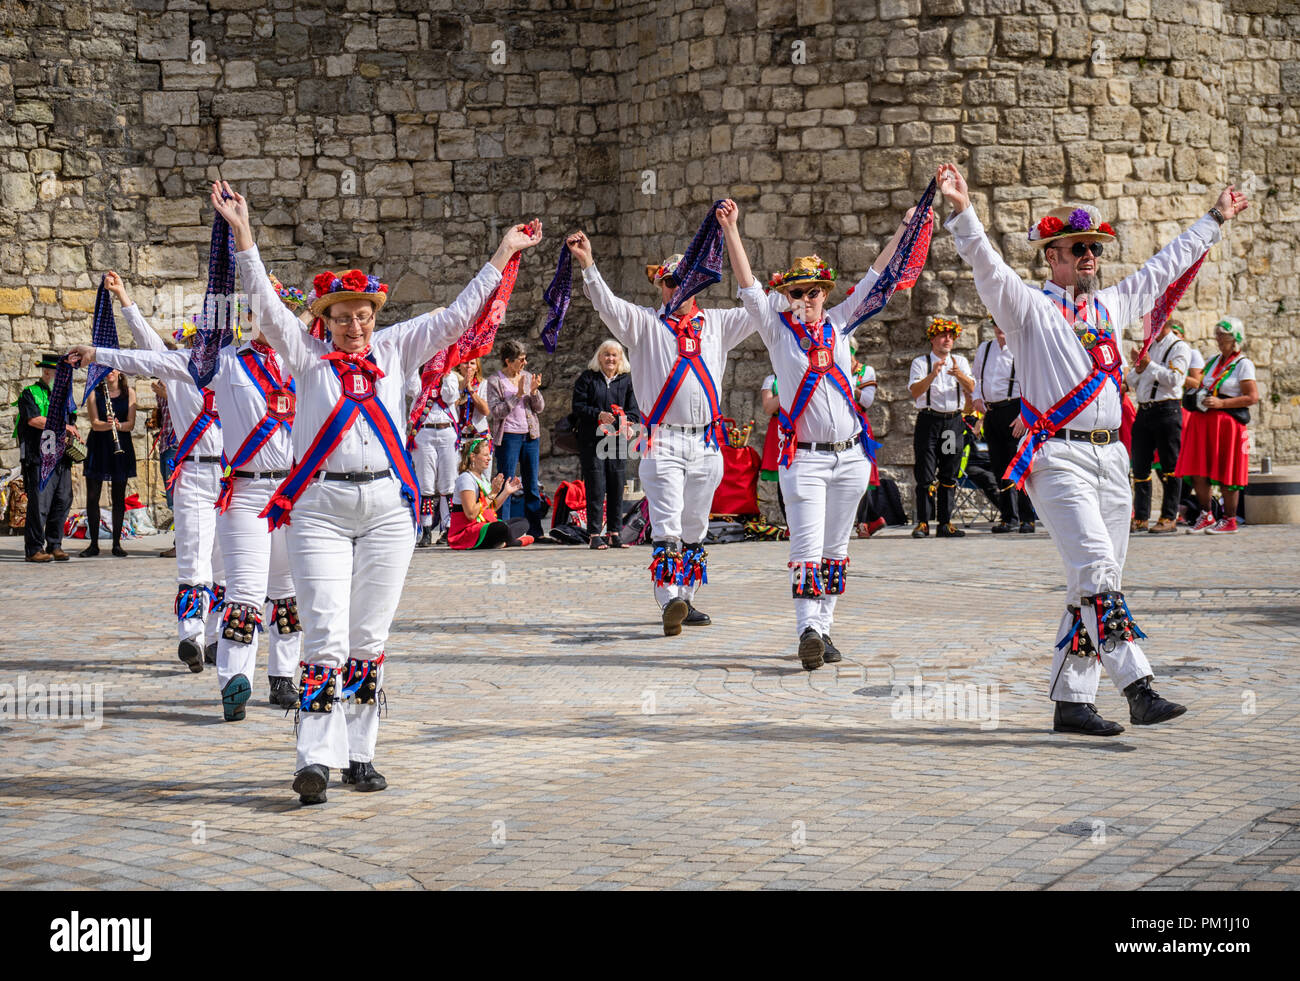 A group of female and male Morris dancers perform a Morris dance in front of the Southampton Walls, Southampton, Hampshire, England, UK Stock Photo